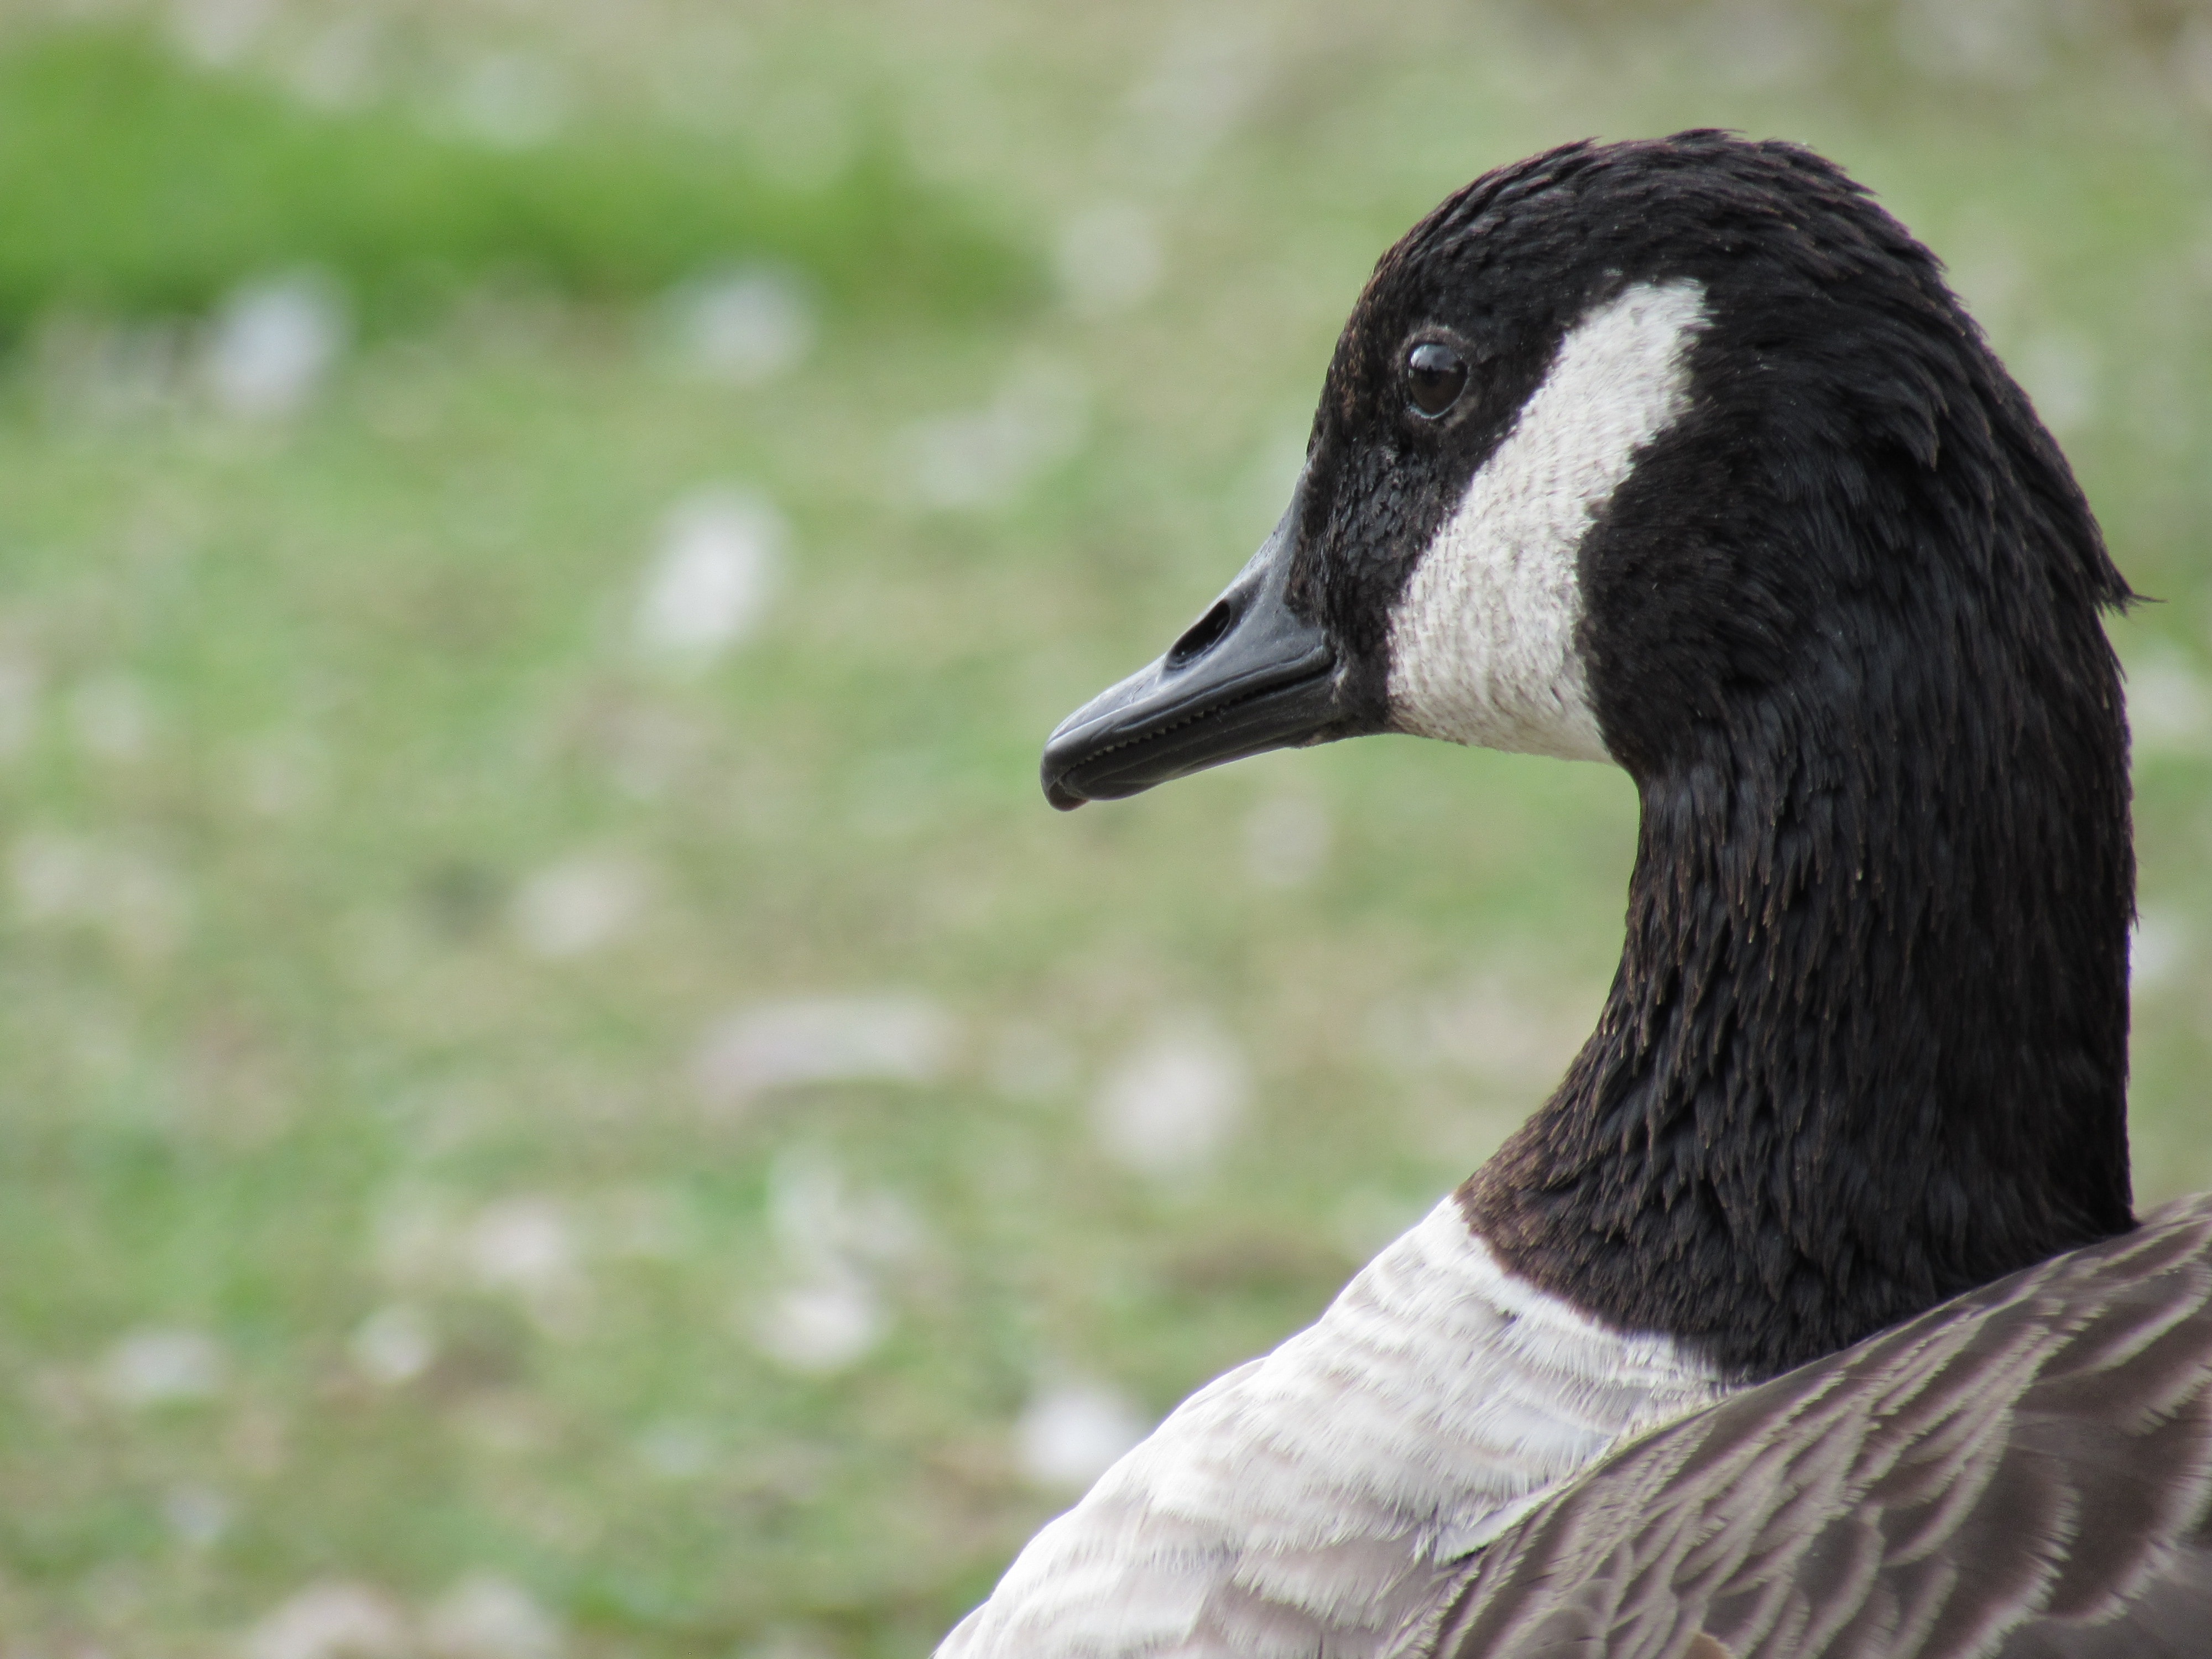 black and white duck